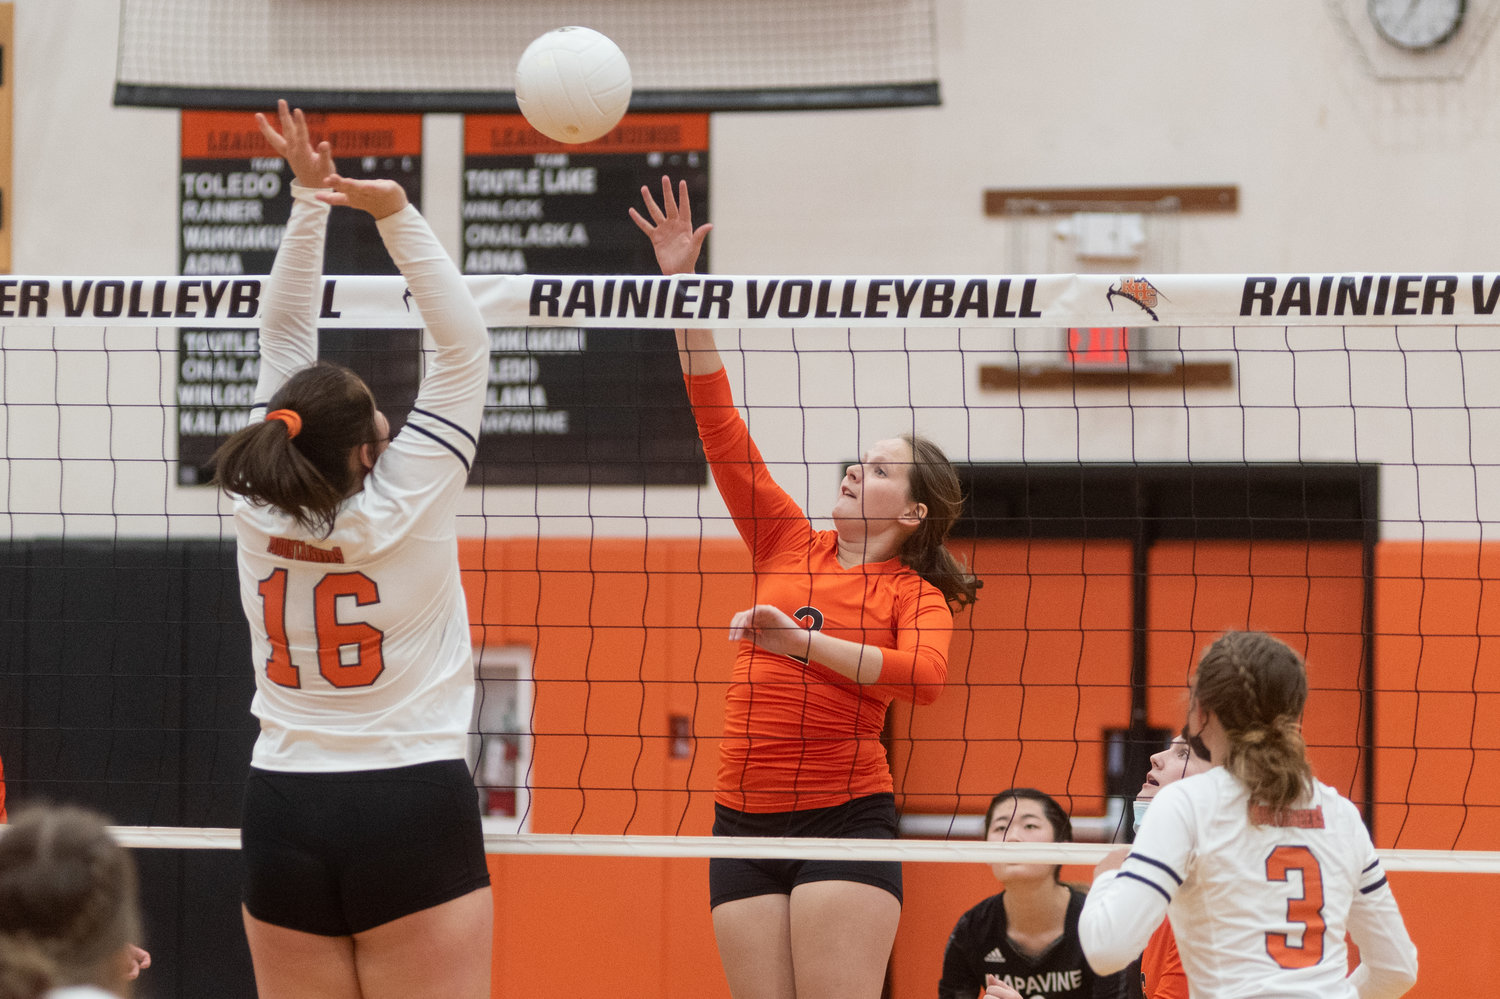 FILE PHOTO -- Napavine sophomore Anna Thompson attempts a spike in the Tigers match against Rainier Sept. 27.